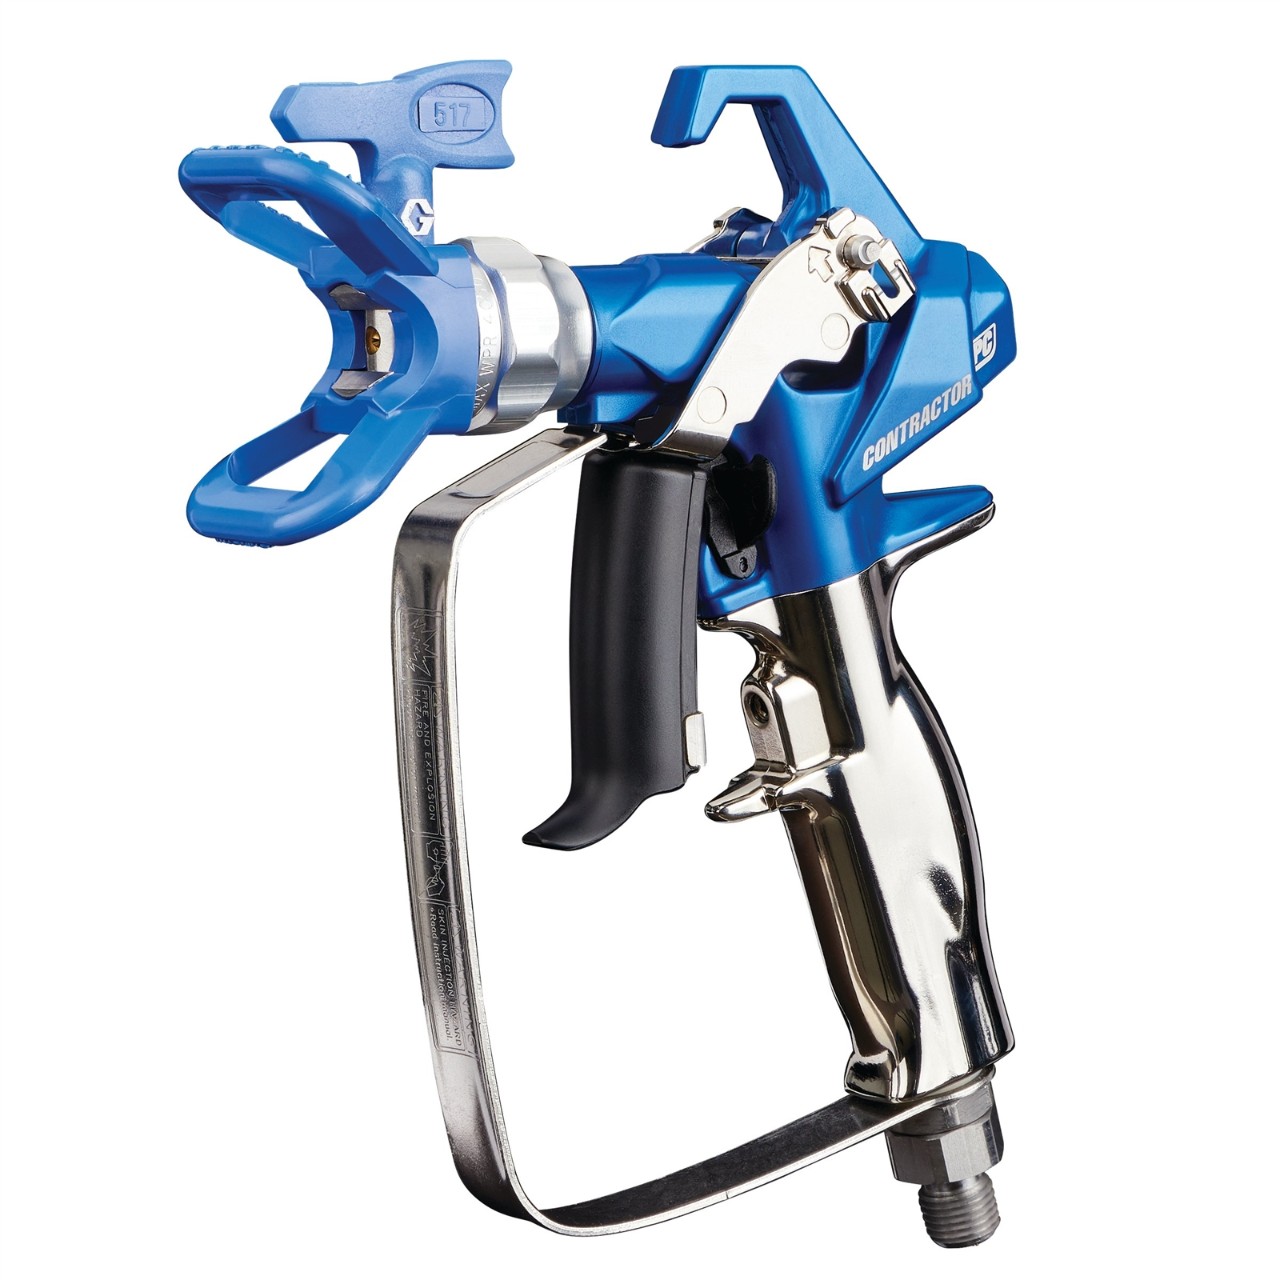 Graco Paint Sprayers, Spray tips, repair parts and accessories